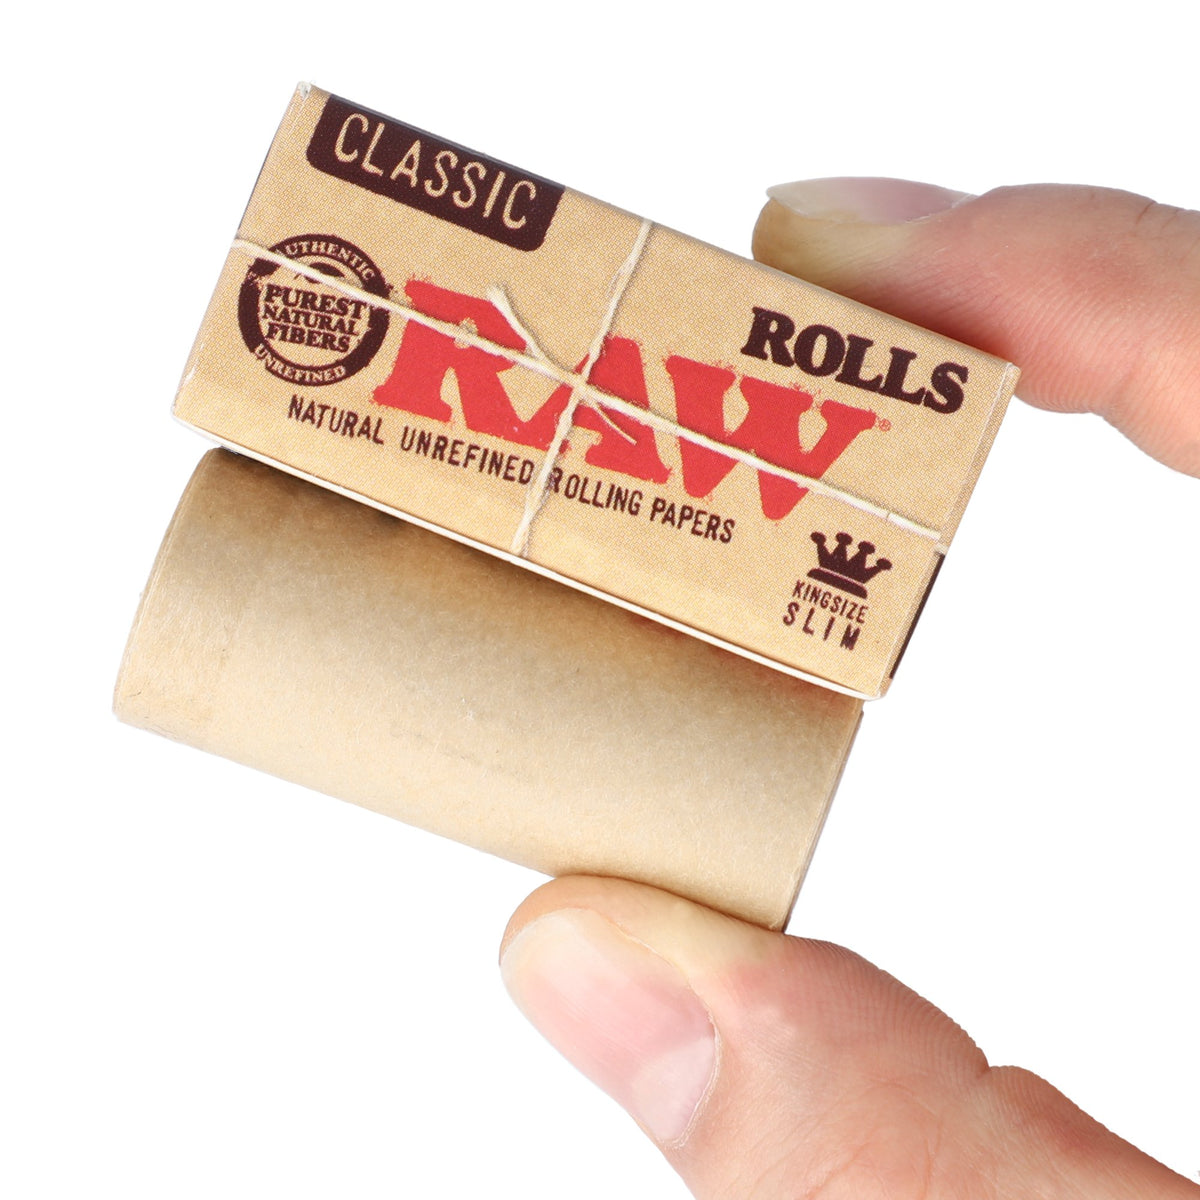 RAW Classic Paper Rolls King Size Slim - 5 Meters Rolling Papers WAR00344-1/24 esd-official